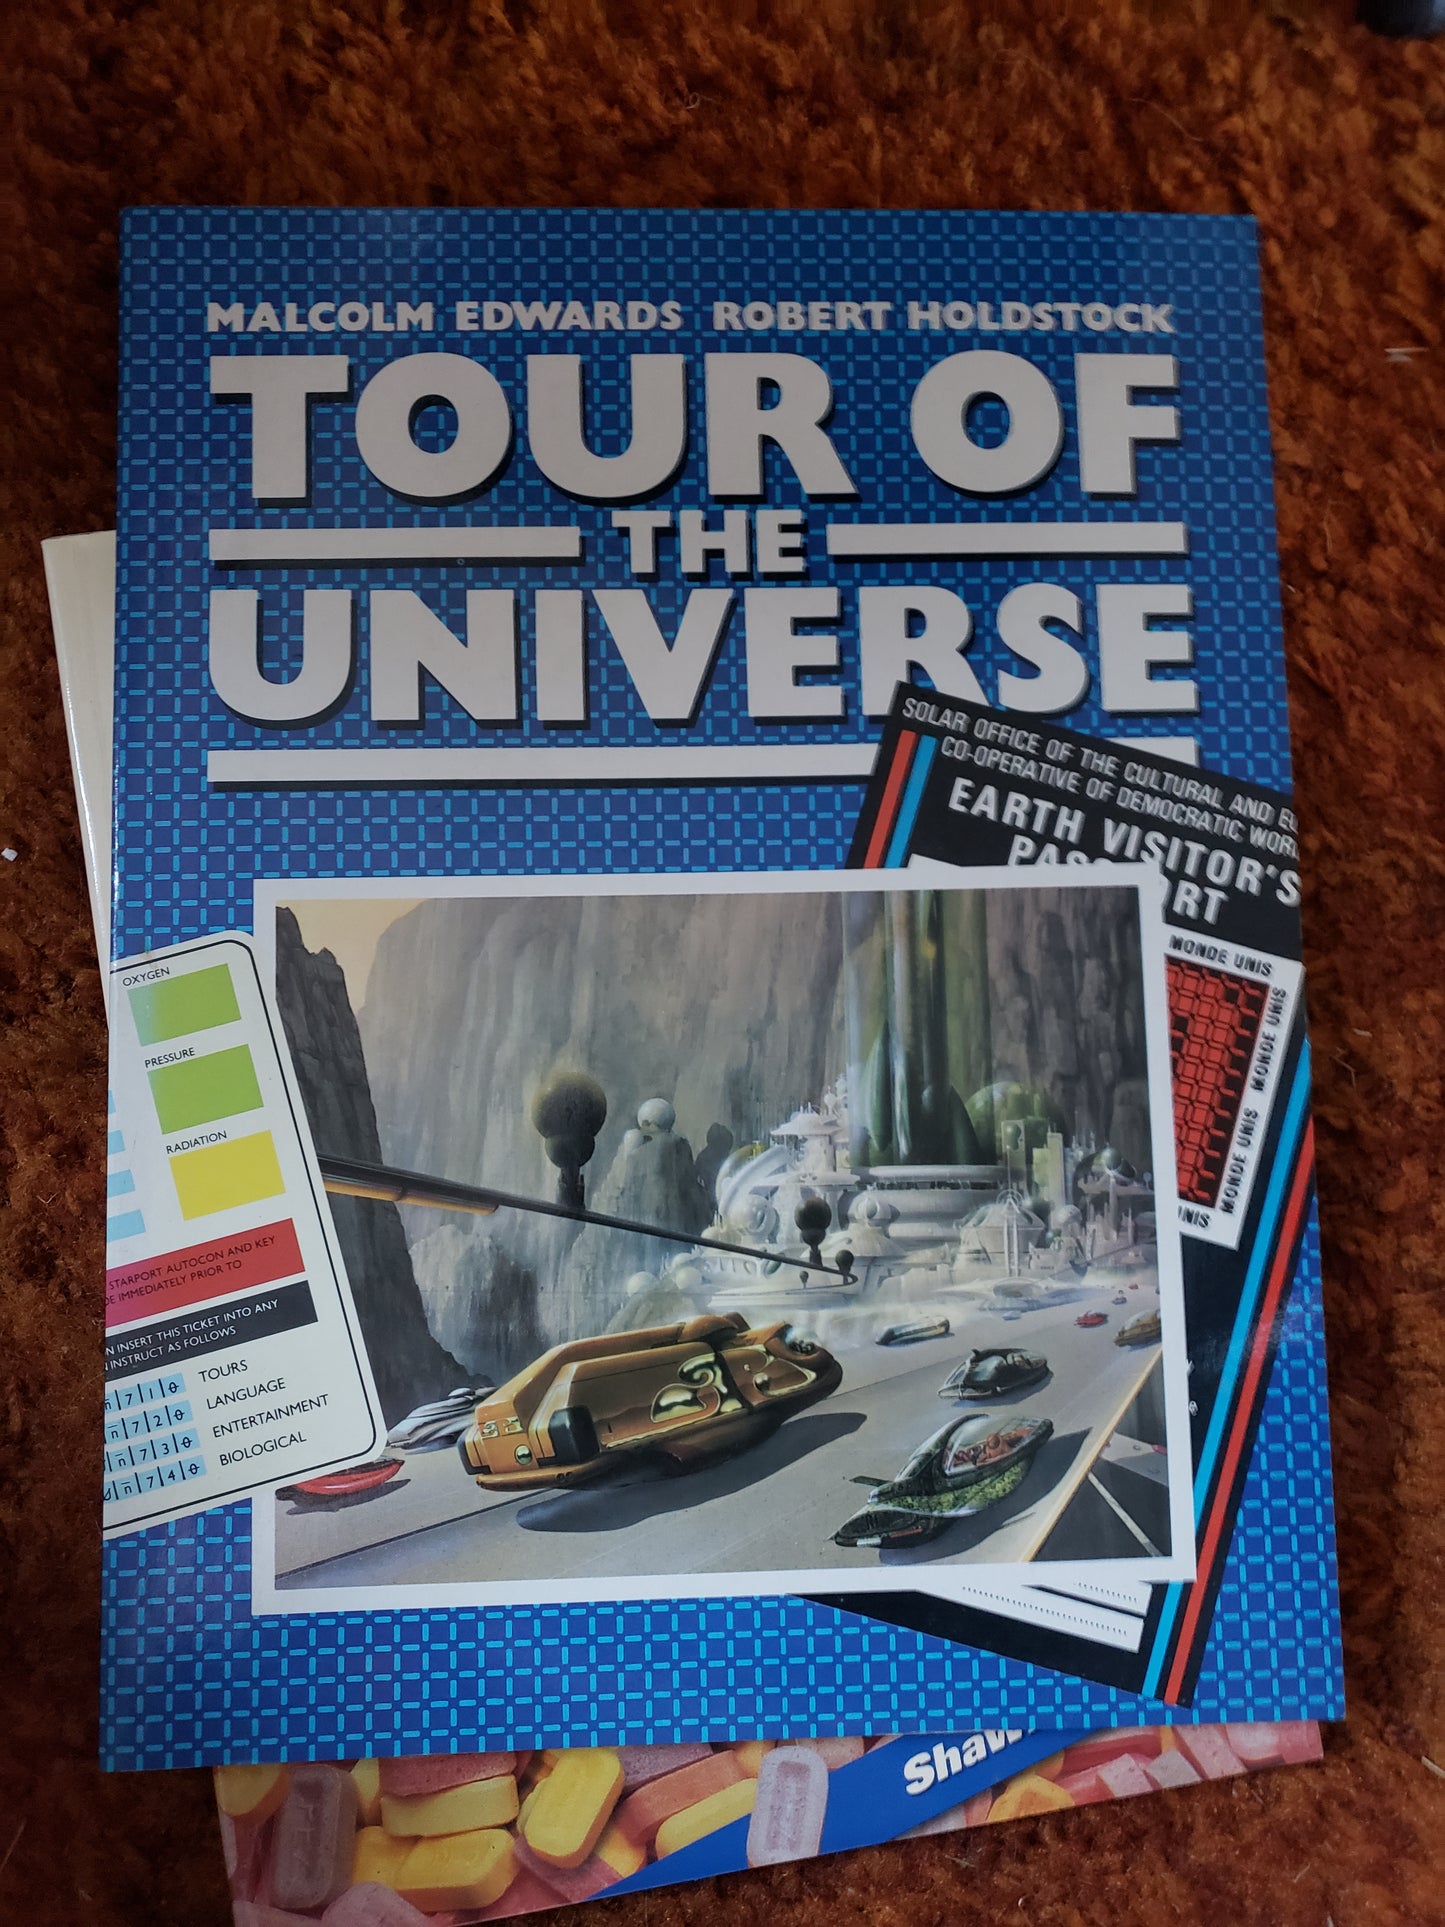 Malcolm Edwards Robert Holdstock Tour of the Universe